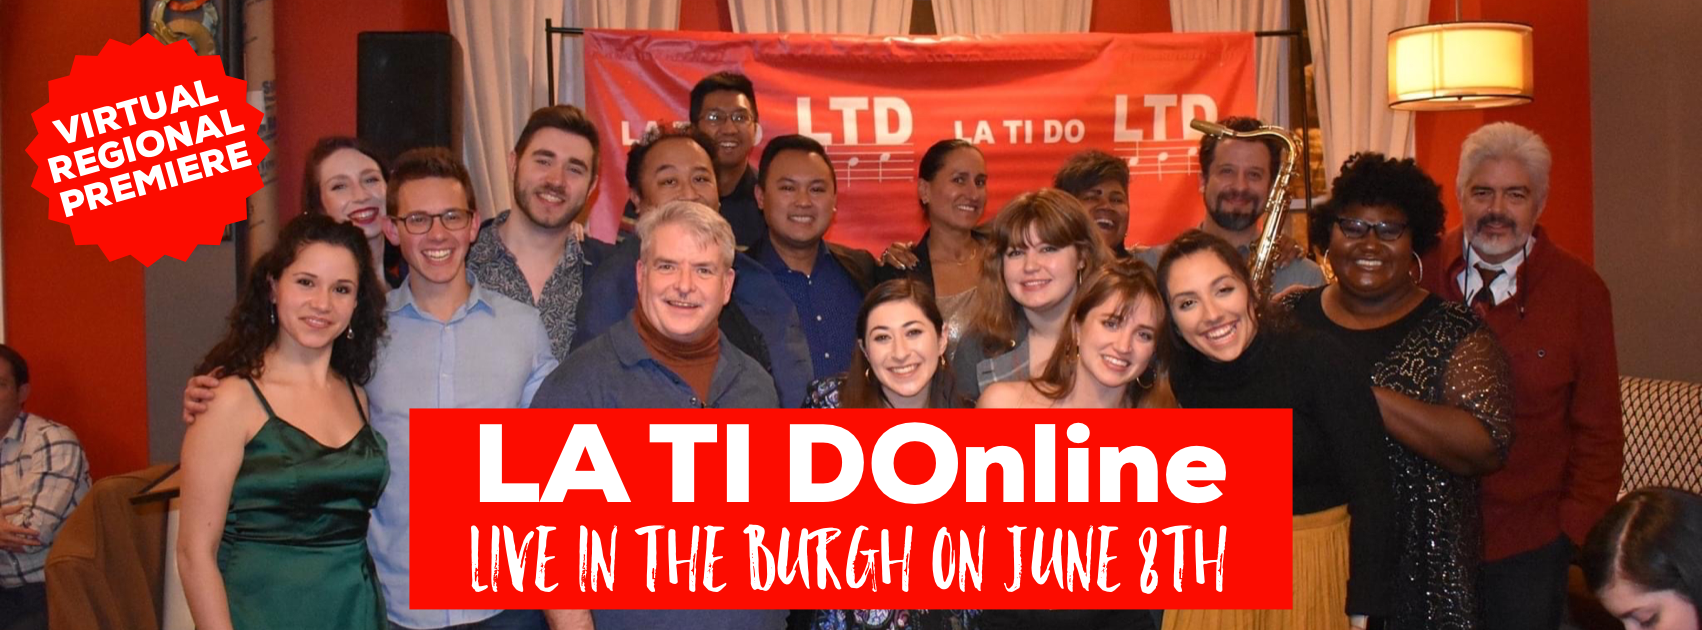 LA TI DO Productions to Launch LA TI DONLINE Featuring Natalie Weiss and More 